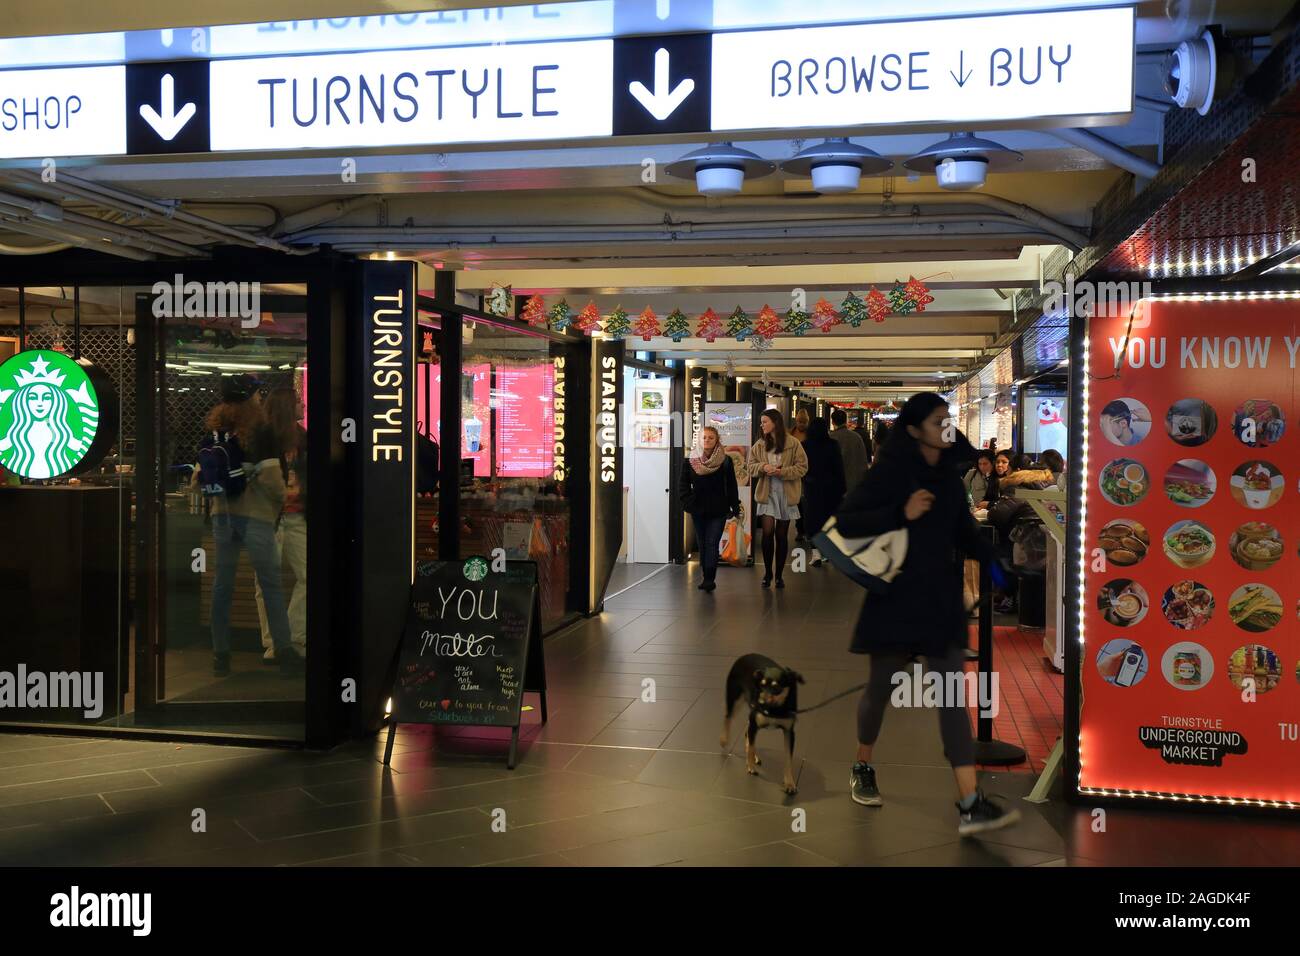 Turnstyle Underground Market, New York, NY.  a marketplace and food hall located in a subway and transit passageway in Columbus Circle in Manhattan. Stock Photo